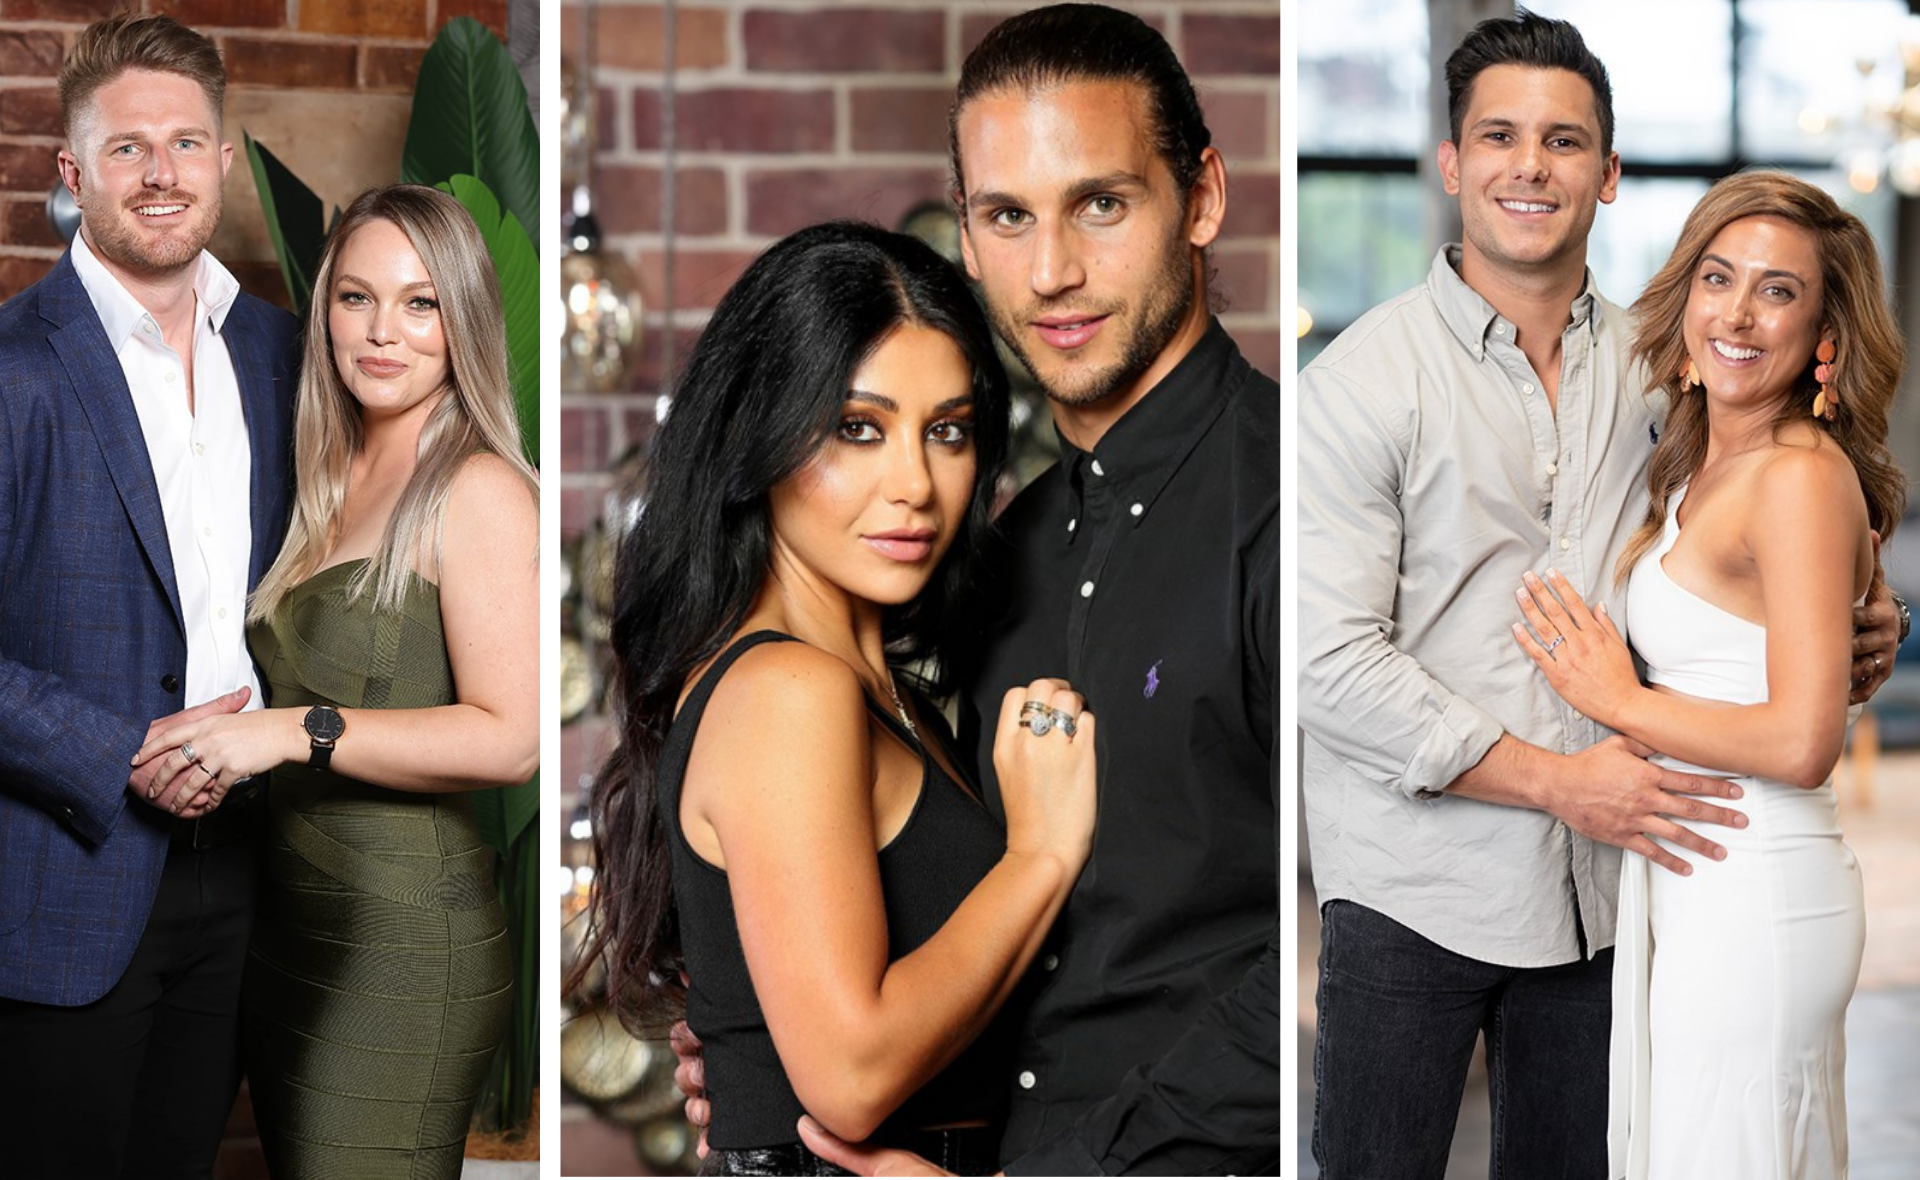 A match made in MAFS: All the Married At First Sight couples who are still together